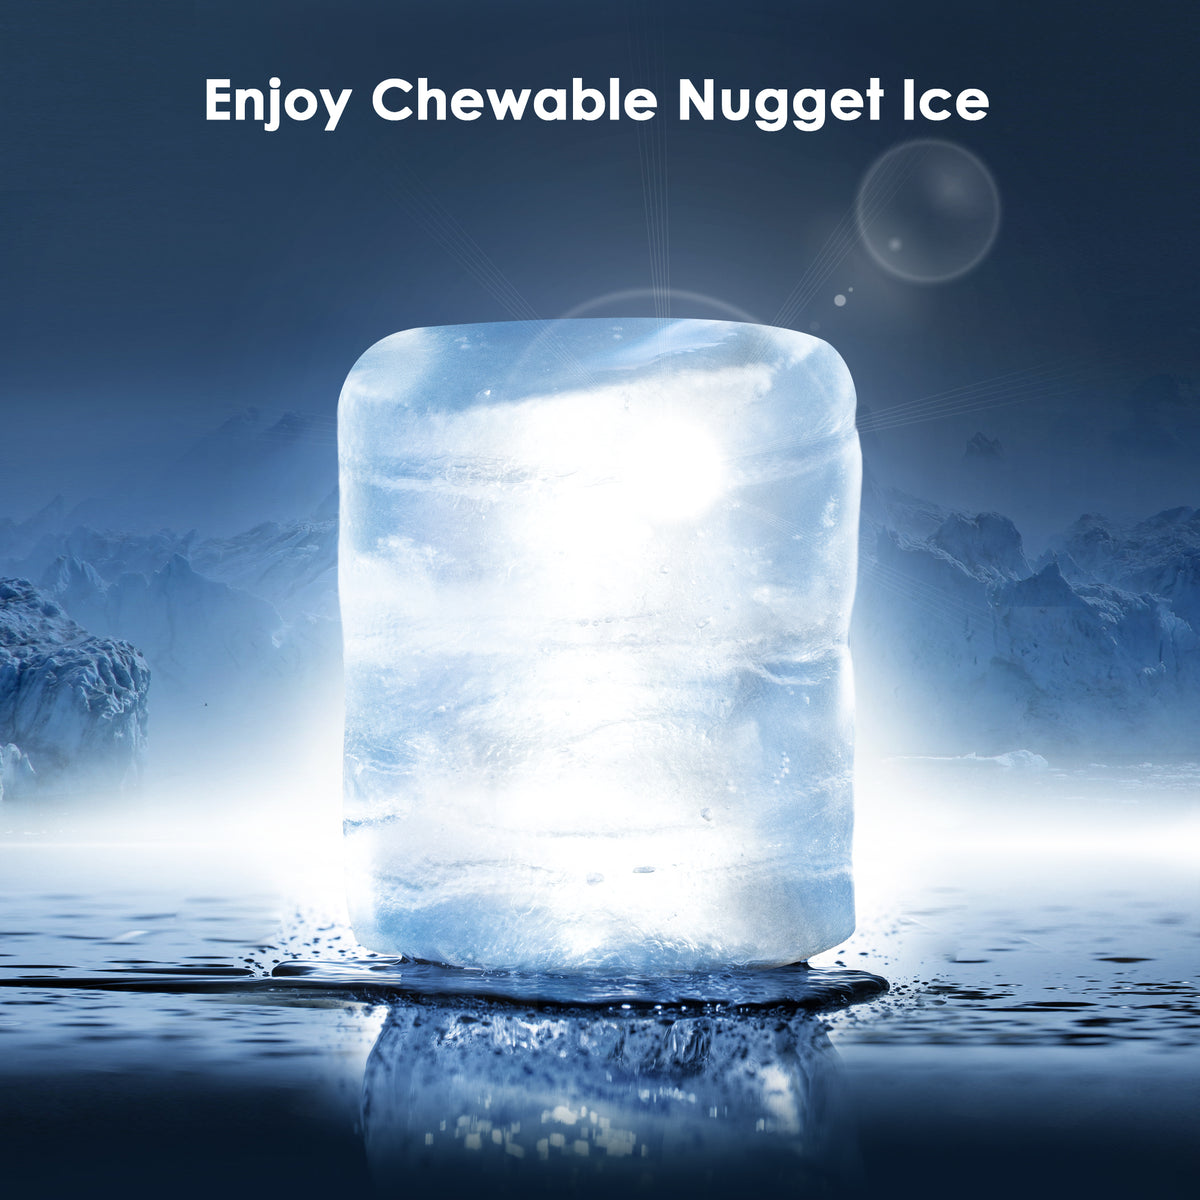 Sonic Style Ice Oraimo Nugget Ice Maker 812A, Ice Makers Countertop Chewable  ice 